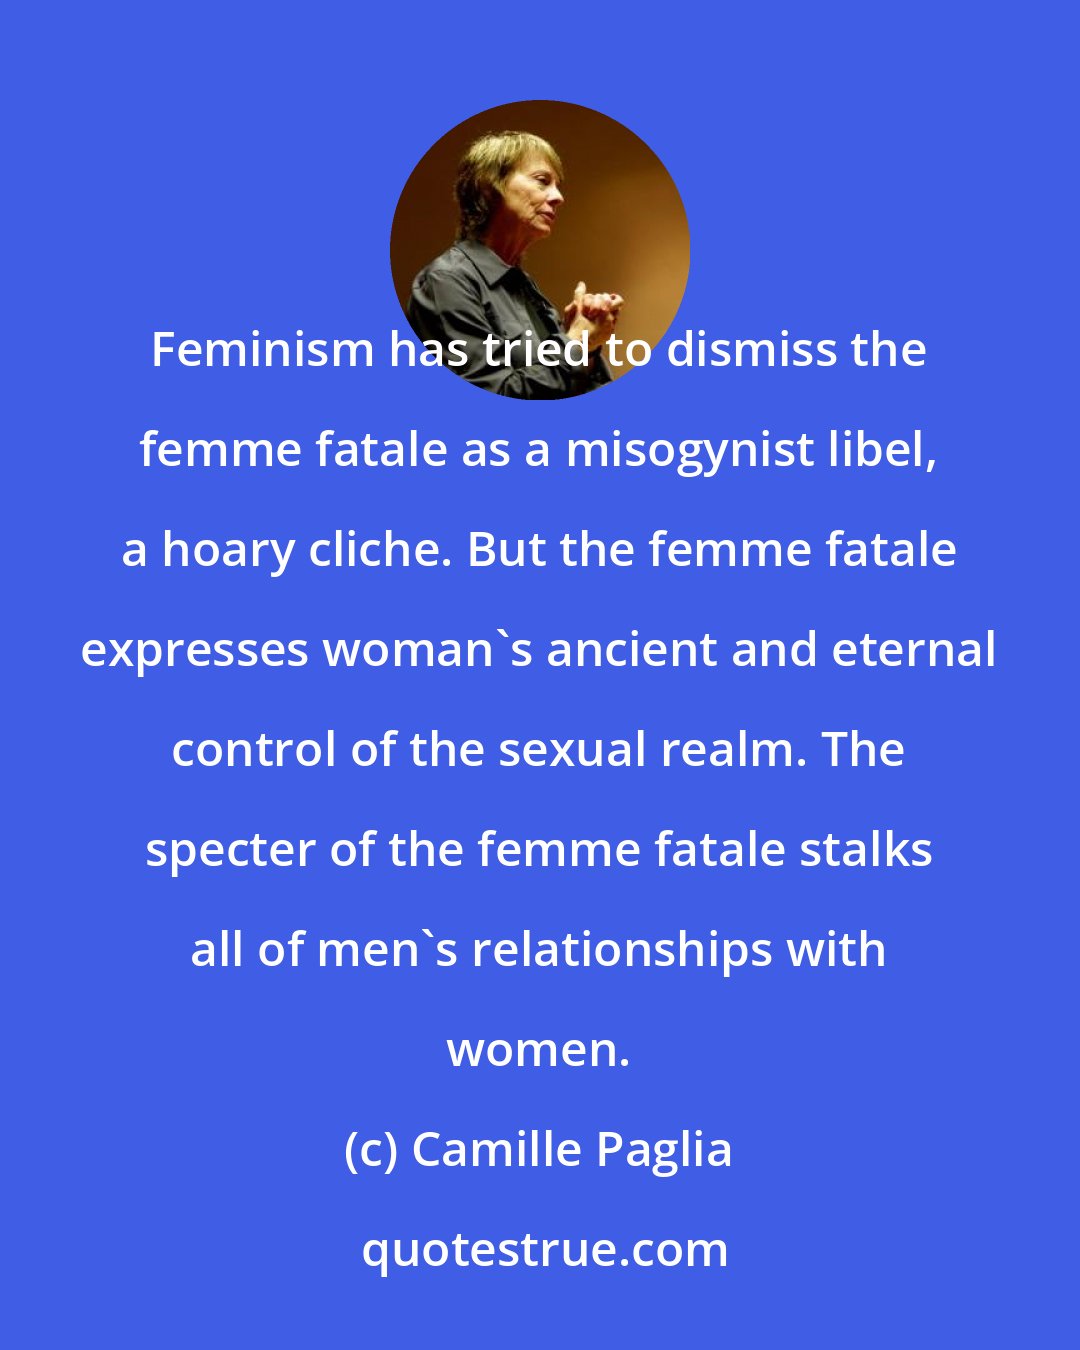 Camille Paglia: Feminism has tried to dismiss the femme fatale as a misogynist libel, a hoary cliche. But the femme fatale expresses woman's ancient and eternal control of the sexual realm. The specter of the femme fatale stalks all of men's relationships with women.